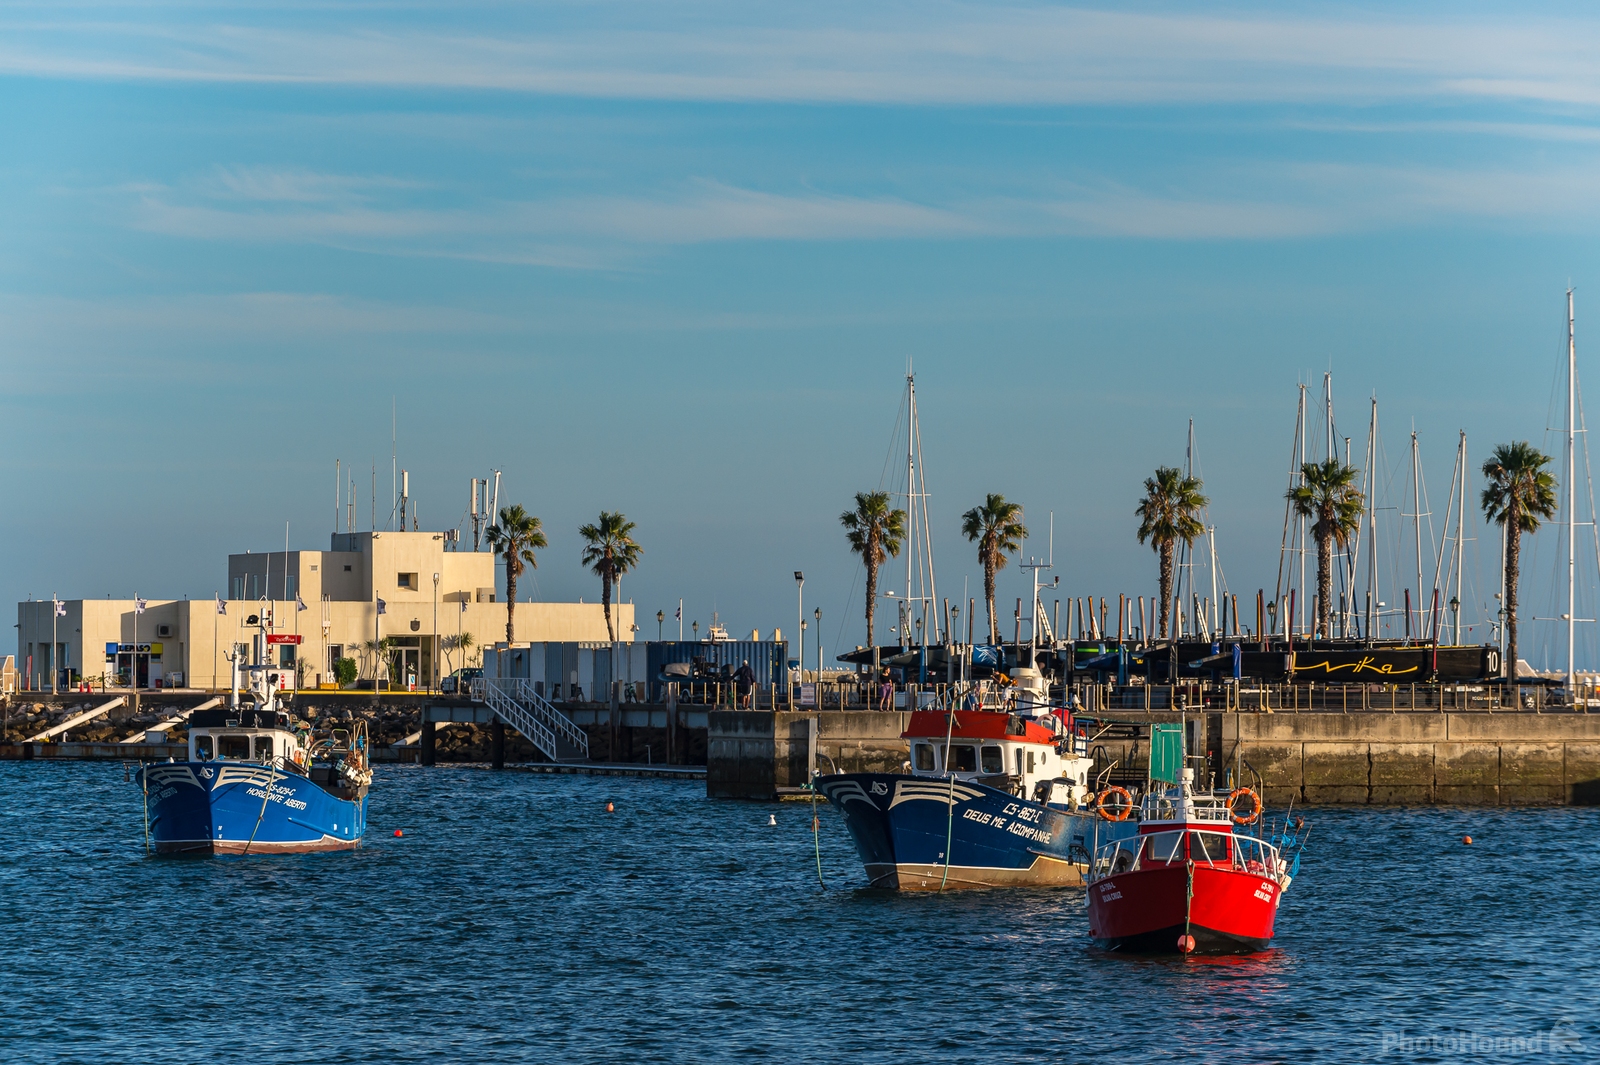 Image of Cascais Waterfront by Sue Wolfe